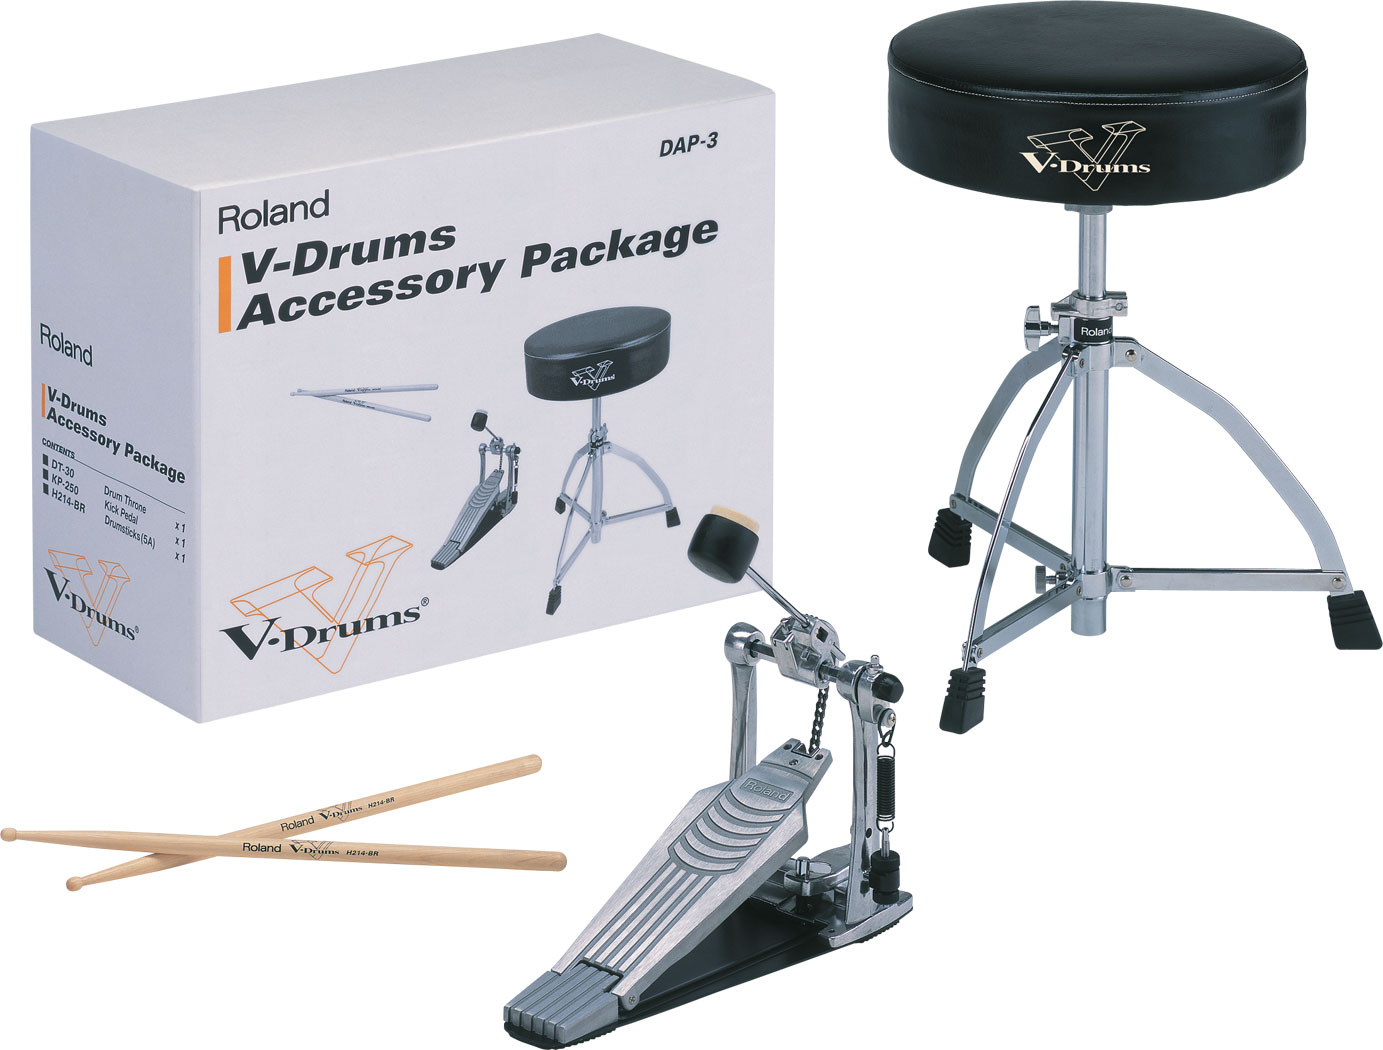 Roland - DAP-3 | V-Drums Accessory Package